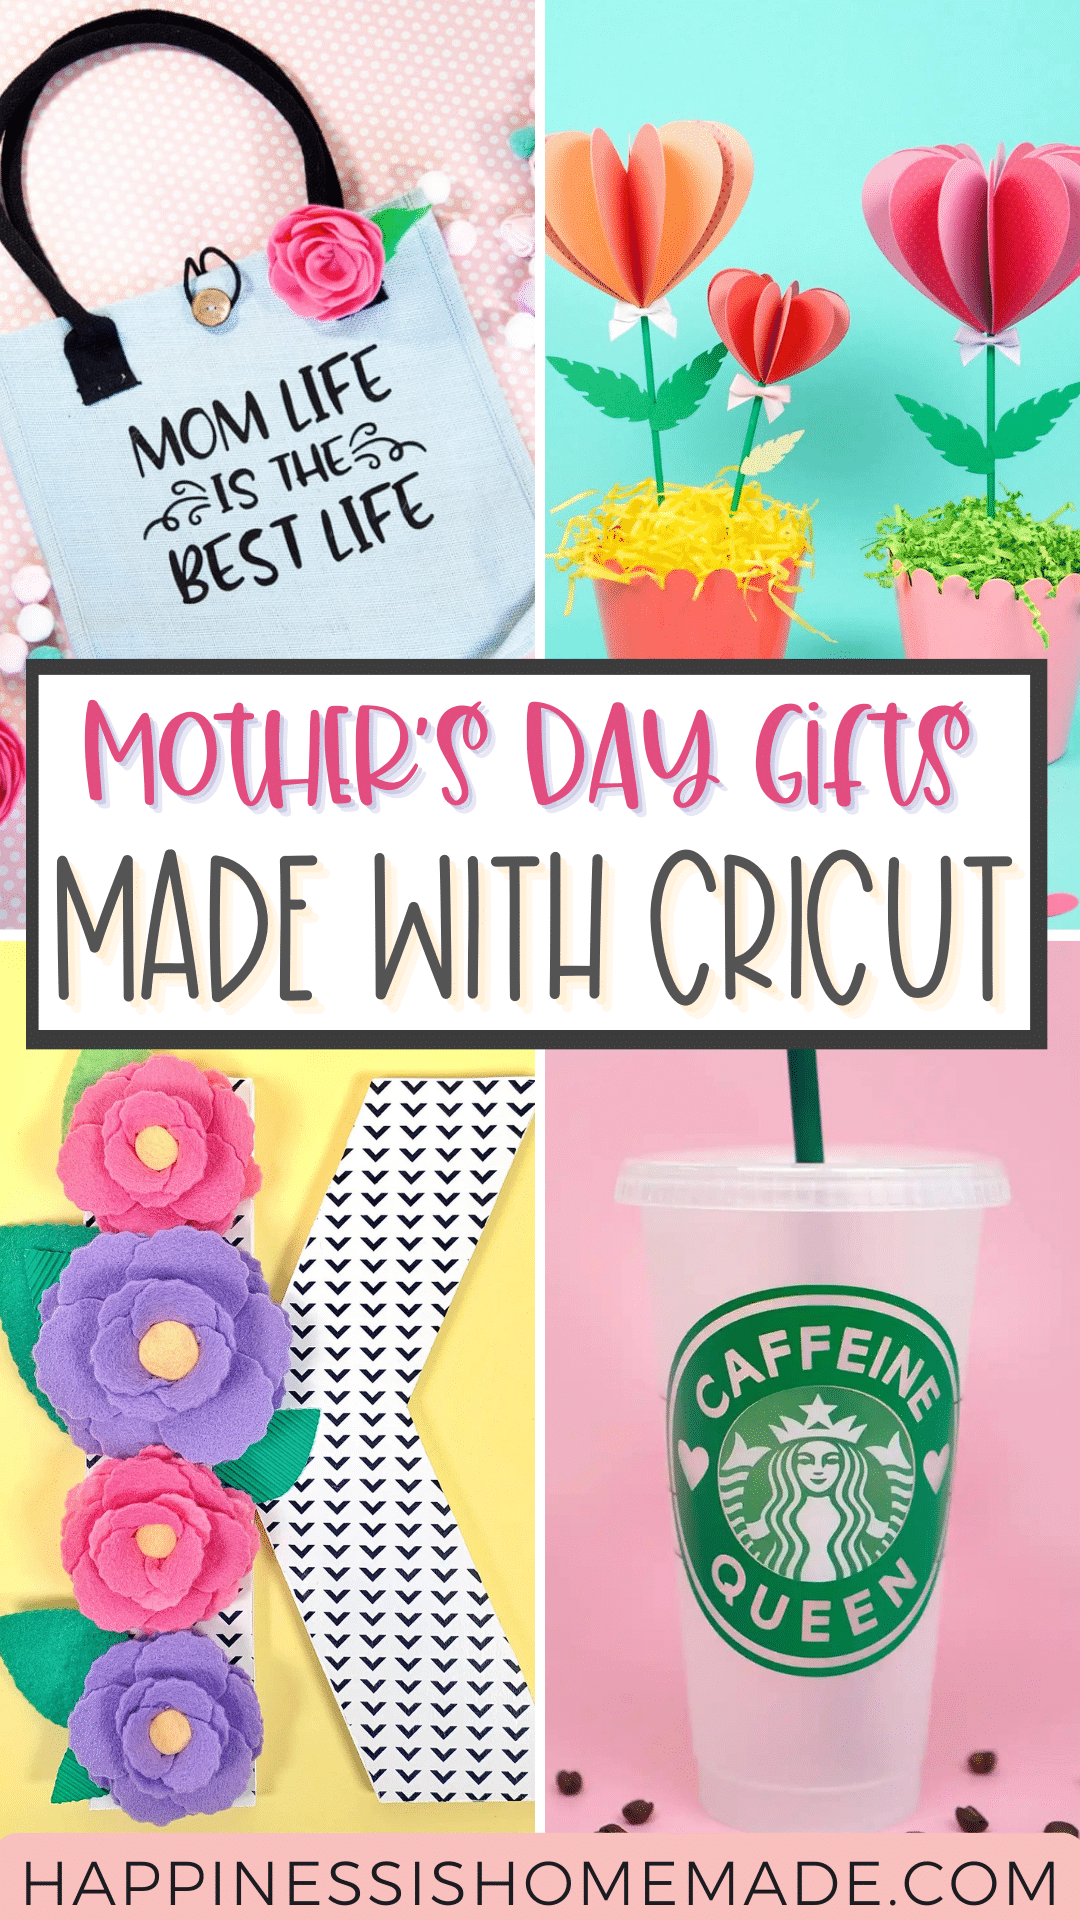 https://www.happinessishomemade.net/wp-content/uploads/2023/03/Mothers-Day-Gifts-Made-With-Cricut-Pin-Graphic.png